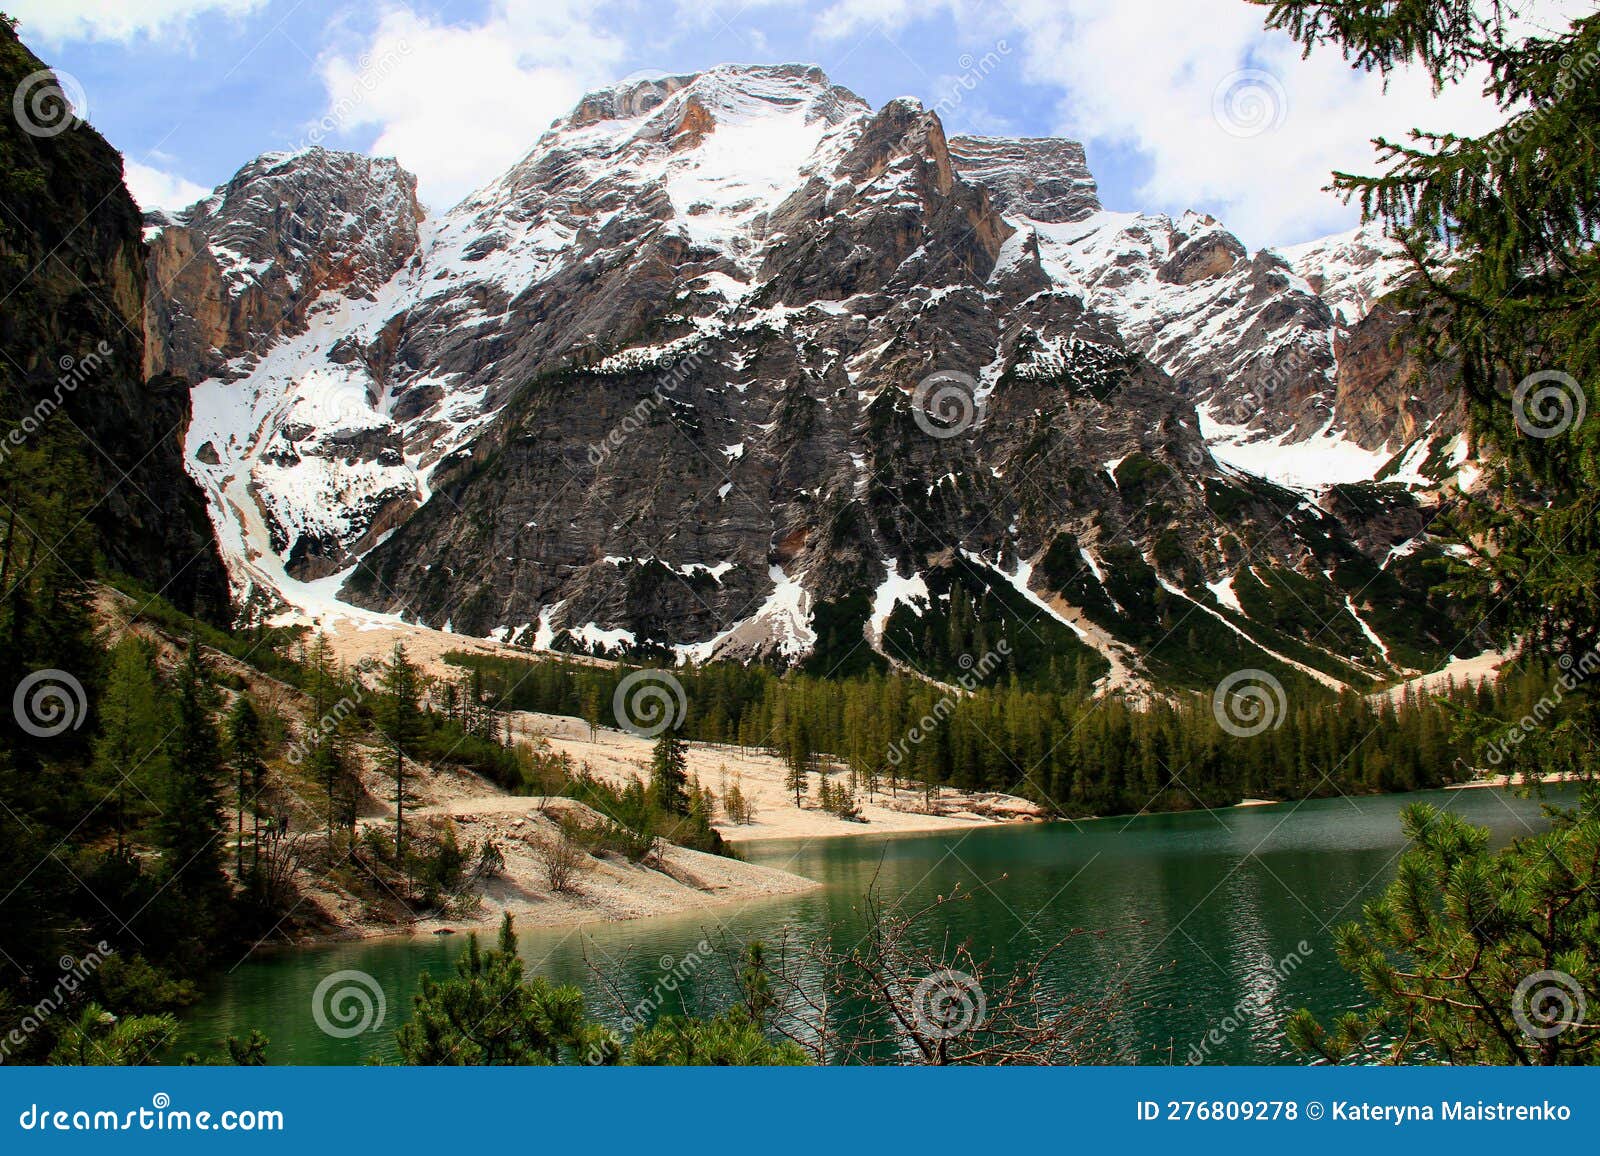 view of the emerald smooth surface of lago di braies lake and snow capped mountains in the dolomites